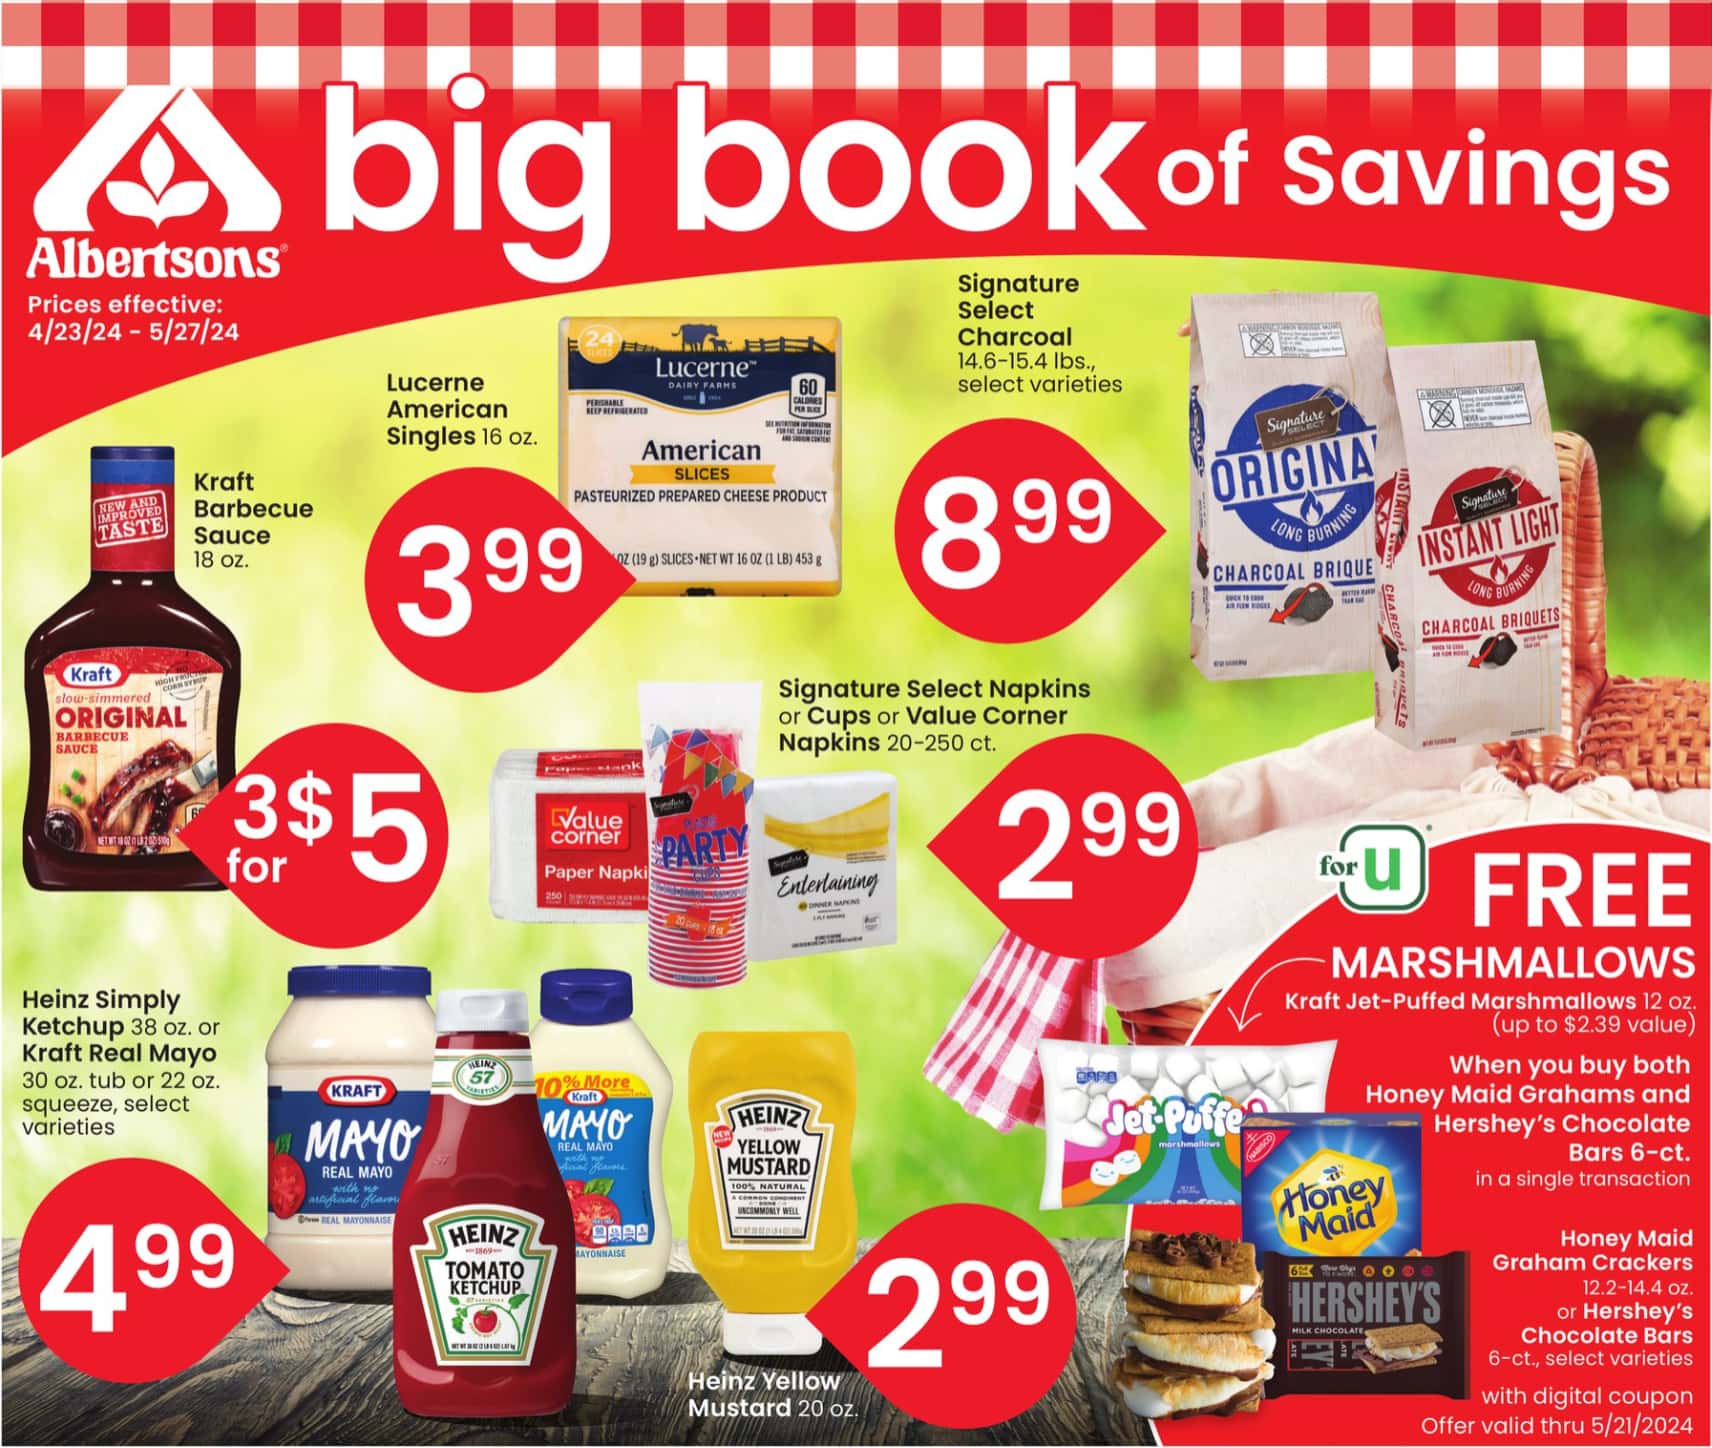 Albertsons_weekly_ad_042324_01